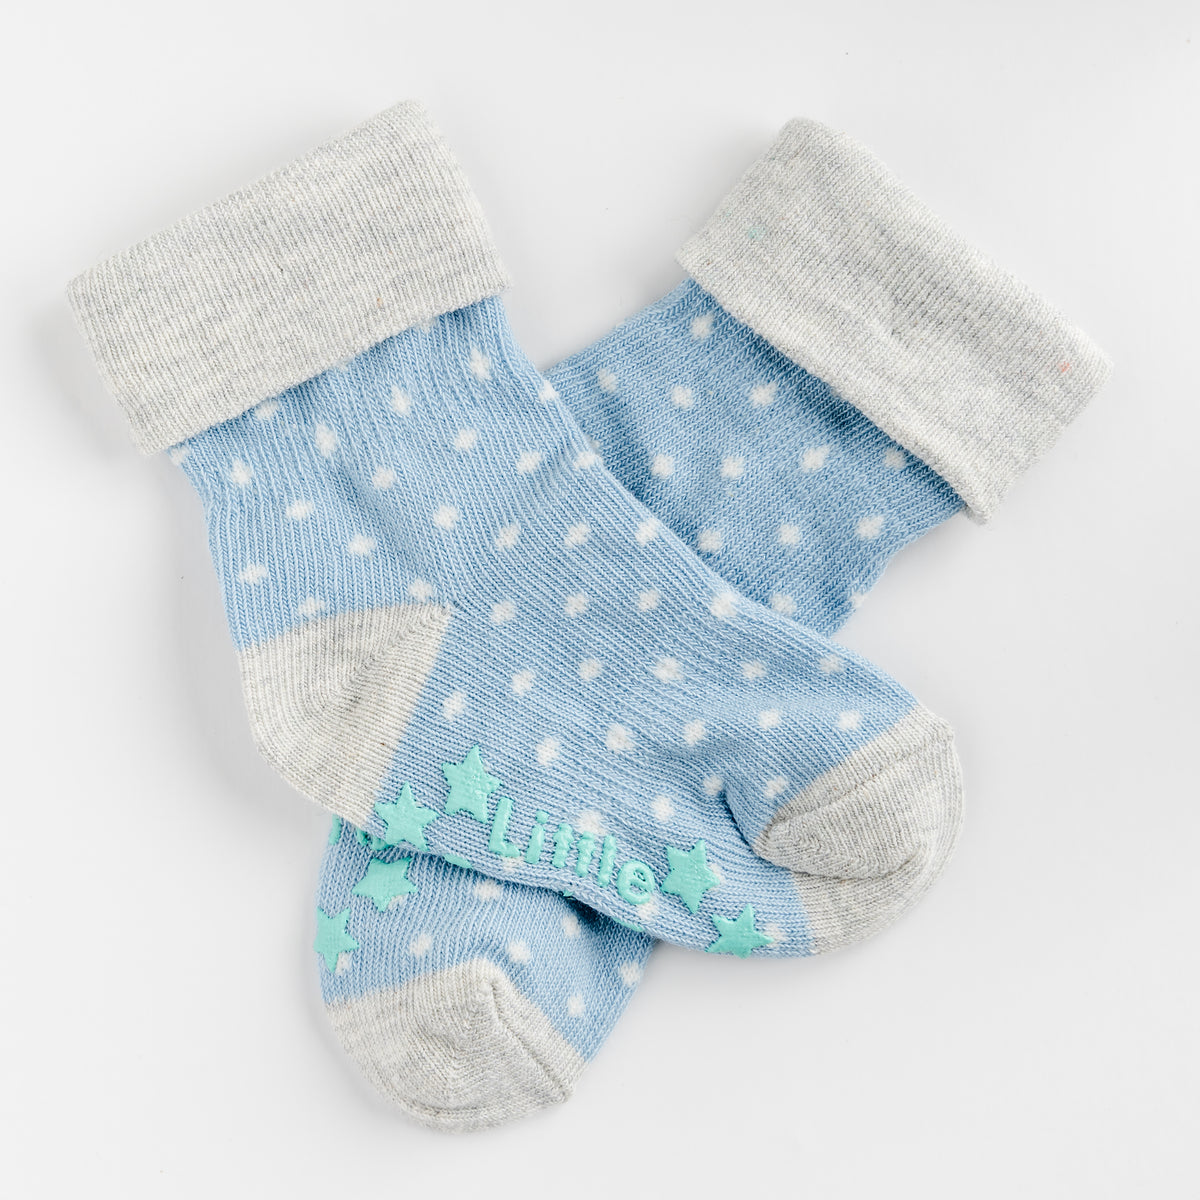 Non-Slip Stay On Baby and Toddler Socks - 3 Pack in Light Blues